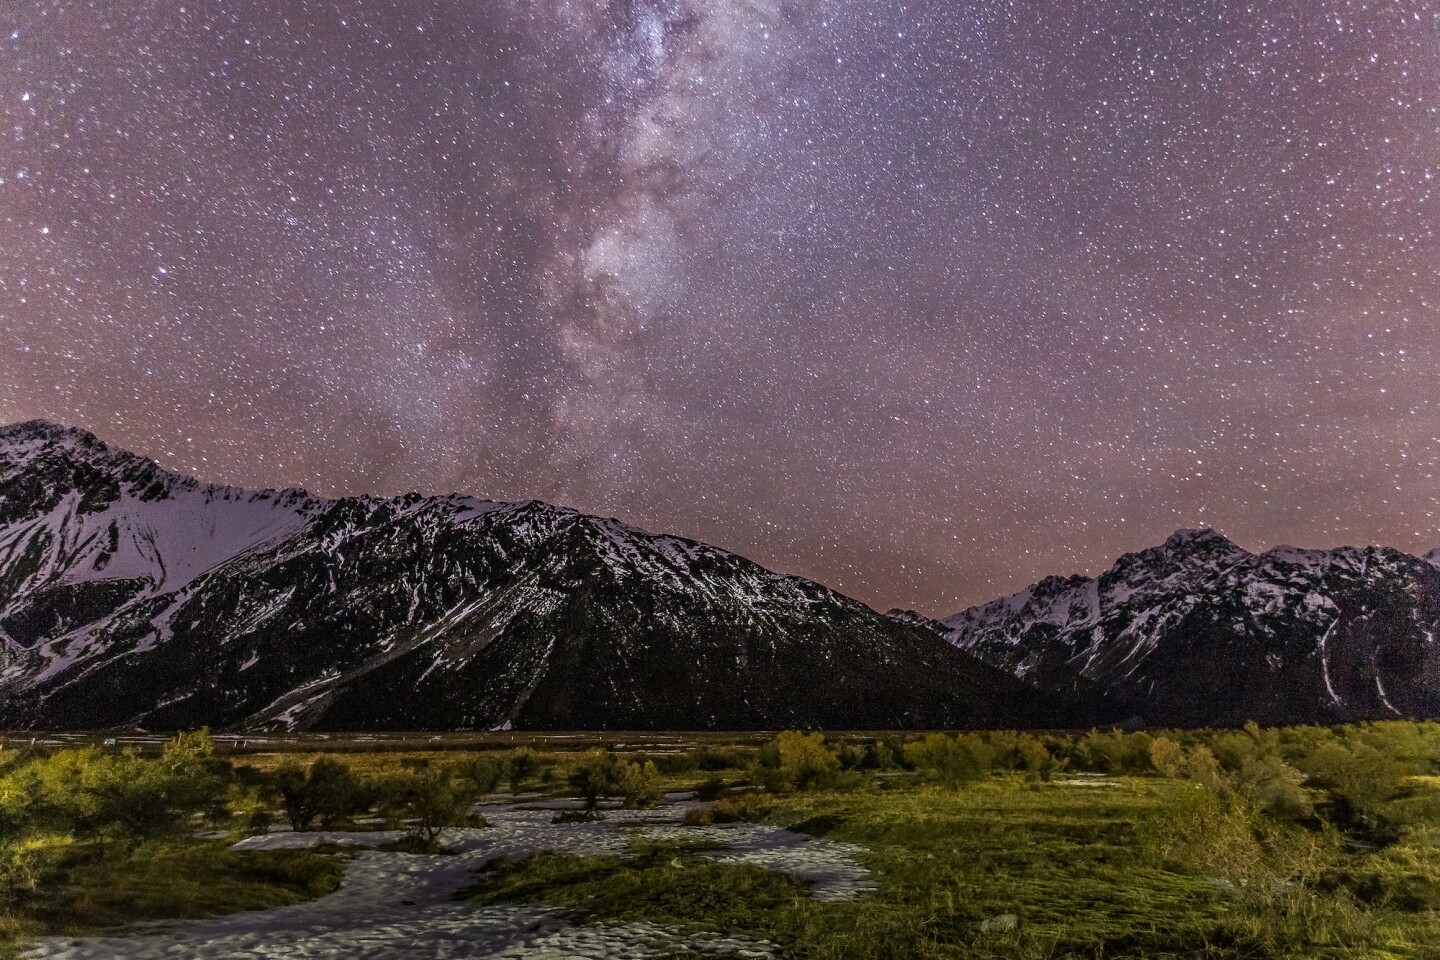 <h2>2. Aoraki Mackenzie International Dark Sky Reserve, New Zealand</h2> <p><a class="Link" href="https://www.afar.com/travel-guides/new-zealand/guide" rel="noopener">New Zealand</a>’s <a class="Link" href="https://mackenzienz.com/scenic-highlights/dark-sky-reserve/" rel="noopener">Aoraki Mackenzie International Dark Sky Reserve</a> was established in 2012 to recognize the incredible stargazing opportunities in the Mackenzie Basin on the South Island. At this one of just 20 Dark Sky Reserves in the world, visitors flock toward the reserve’s planetarium, telescope areas, and observatories, where guided tours are offered at both the <a class="Link" href="http://www.earthandsky.co.nz/" rel="noopener">Lake Tekapo Earth and Sky</a> and <a class="Link" href="https://www.afar.com/places/aoraki-slash-mount-cook-national-park-mount-cook-national-park" rel="noopener">Aoraki/Mount Cook</a> visitor centers. On clear nights in the reserve, which comprises Aoraki/Mount Cook National Park, it’s often possible to see the aurora australis, the Southern Cross, and the Southern Star—all with the park’s namesake peak (reaching more than 12,000 feet) in the backdrop.</p>